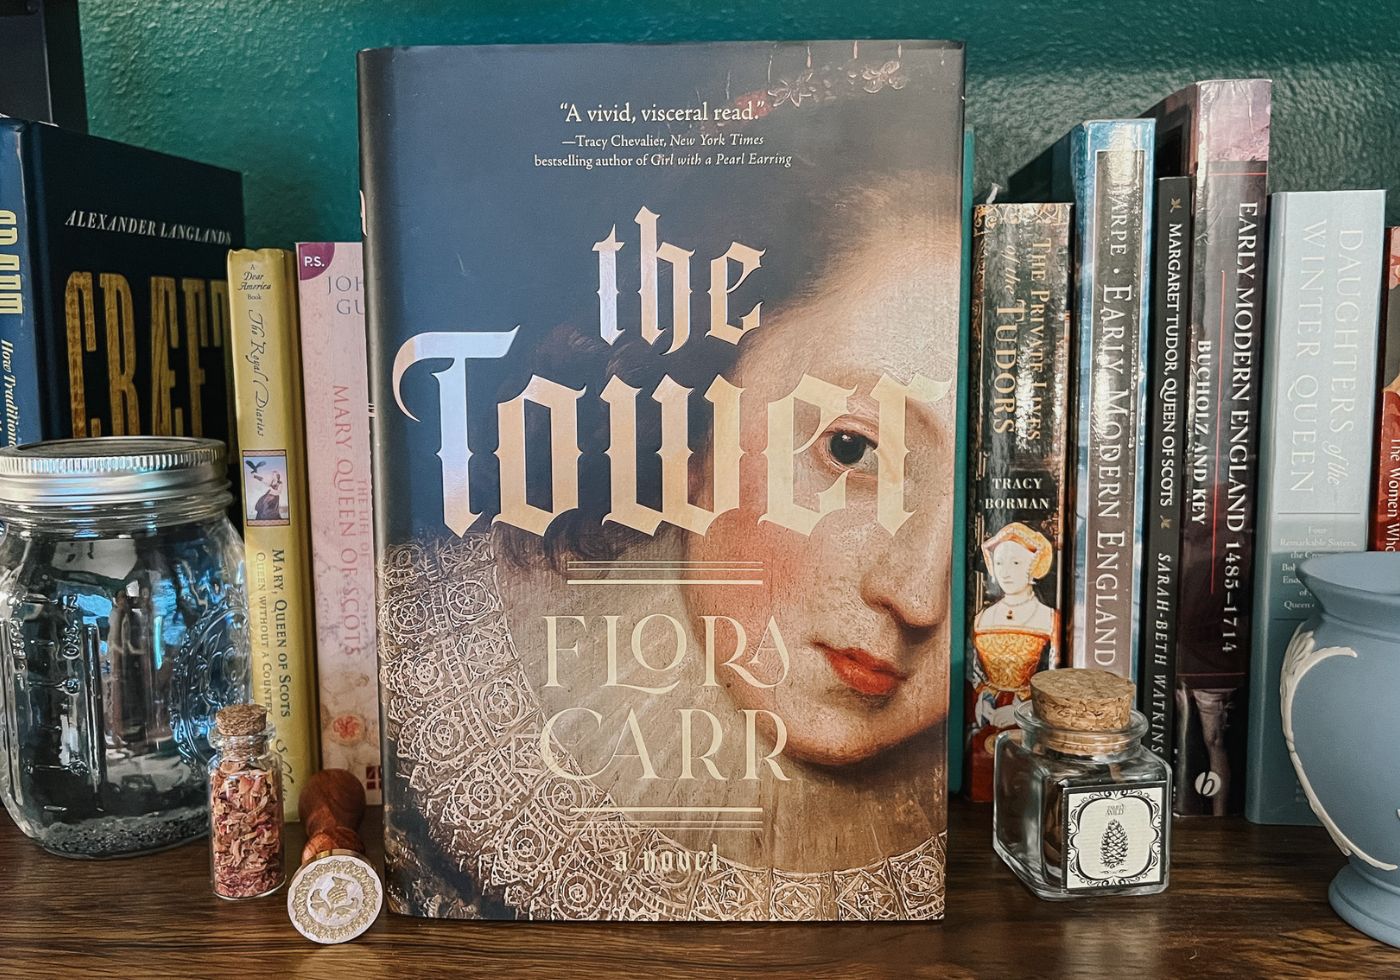 The Tower by Flora Carr